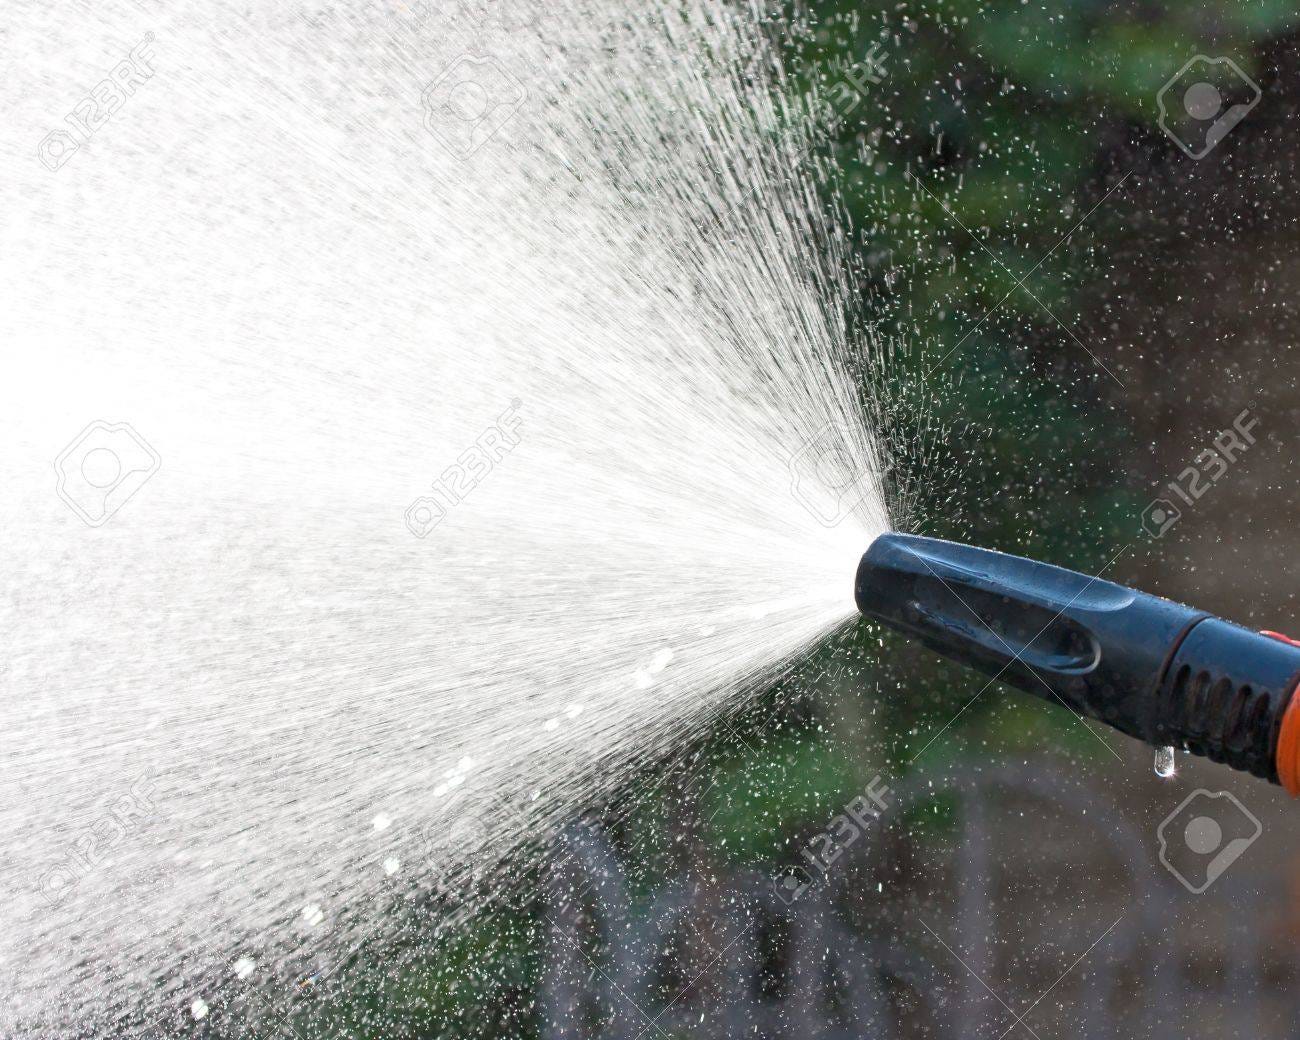 Water Spraying From A Garden Hose Stock Photo, Picture and Royalty Free  Image. Image 15165030.